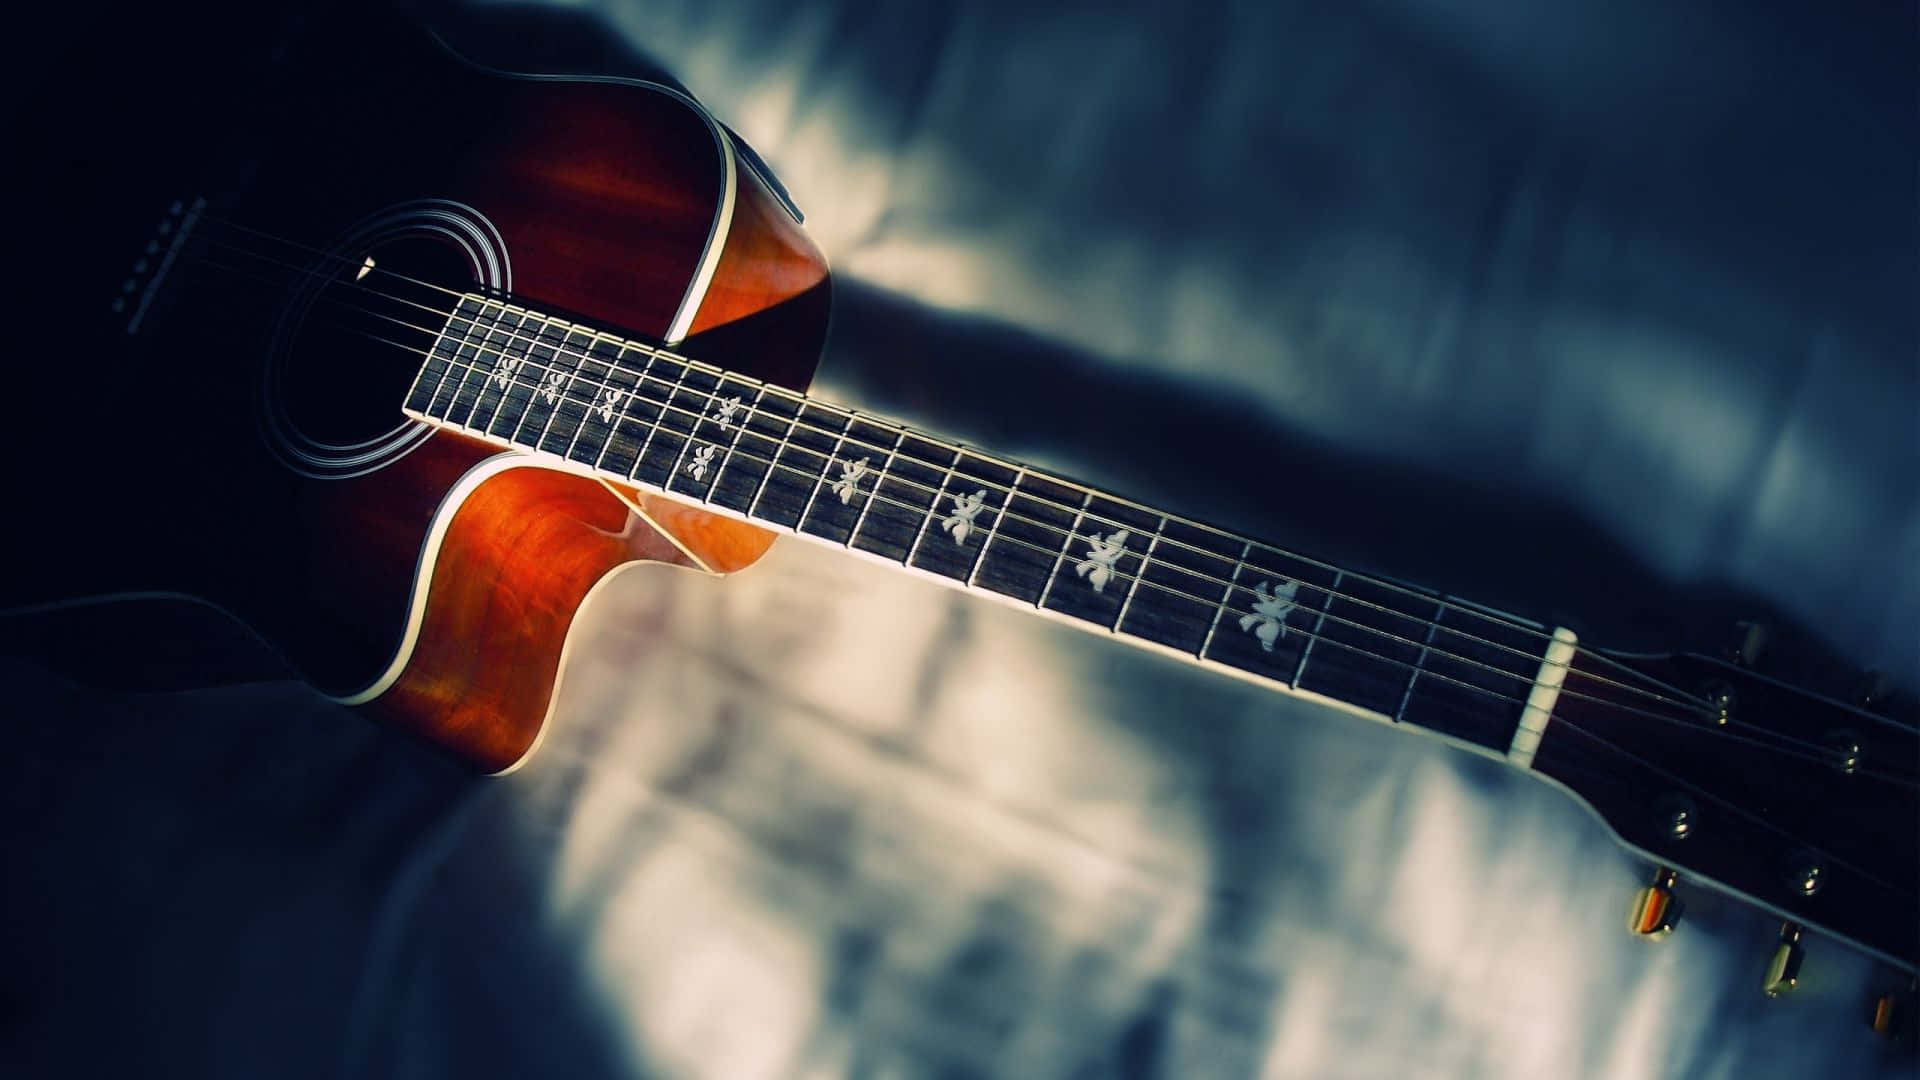 “The Melodic Magic of a Guitar”